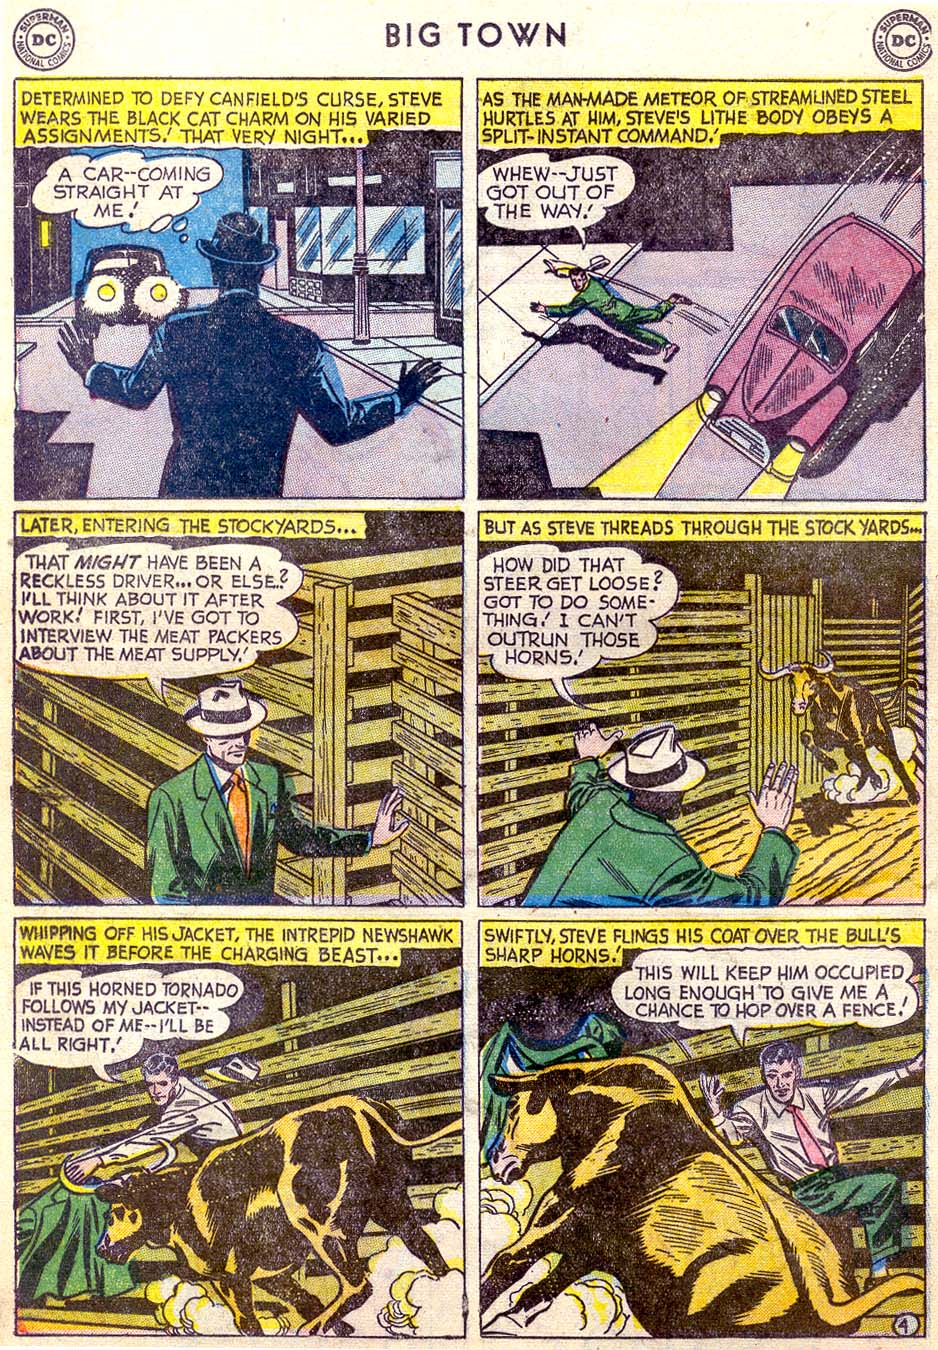 Big Town (1951) 15 Page 15